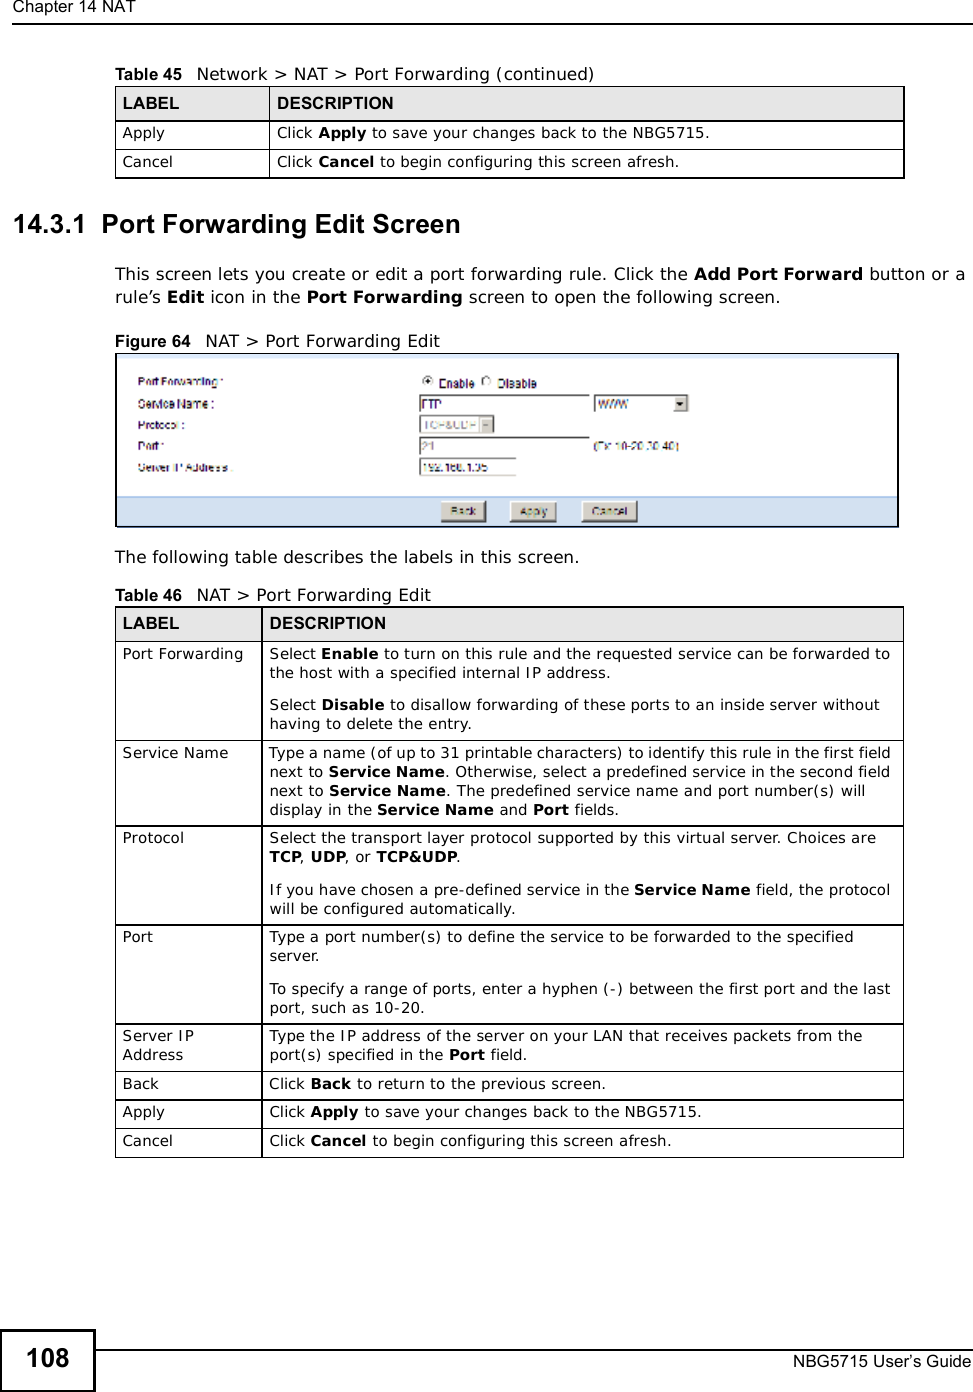 Chapter 14NATNBG5715 User’s Guide10814.3.1  Port Forwarding Edit Screen This screen lets you create or edit a port forwarding rule. Click the Add Port Forward button or a rule’s Edit icon in the Port Forwarding screen to open the following screen.Figure 64   NAT &gt; Port Forwarding Edit The following table describes the labels in this screen. Apply Click Apply to save your changes back to the NBG5715.Cancel Click Cancel to begin configuring this screen afresh.Table 45   Network &gt; NAT &gt; Port Forwarding (continued)LABEL DESCRIPTIONTable 46   NAT &gt; Port Forwarding EditLABEL DESCRIPTIONPort Forwarding Select Enable to turn on this rule and the requested service can be forwarded to the host with a specified internal IP address.Select Disable to disallow forwarding of these ports to an inside server without having to delete the entry. Service NameType a name (of up to 31 printable characters) to identify this rule in the first field next to Service Name. Otherwise, select a predefined service in the second field next to Service Name. The predefined service name and port number(s) will display in the Service Name and Port fields.Protocol Select the transport layer protocol supported by this virtual server. Choices are TCP,UDP, or TCP&amp;UDP.If you have chosen a pre-defined service in the Service Name field, the protocol will be configured automatically.Port Type a port number(s) to define the service to be forwarded to the specified server.To specify a range of ports, enter a hyphen (-) between the first port and the last port, such as 10-20.Server IP Address Type the IP address of the server on your LAN that receives packets from the port(s) specified in the Port field.BackClick Back to return to the previous screen.Apply Click Apply to save your changes back to the NBG5715.Cancel Click Cancel to begin configuring this screen afresh.